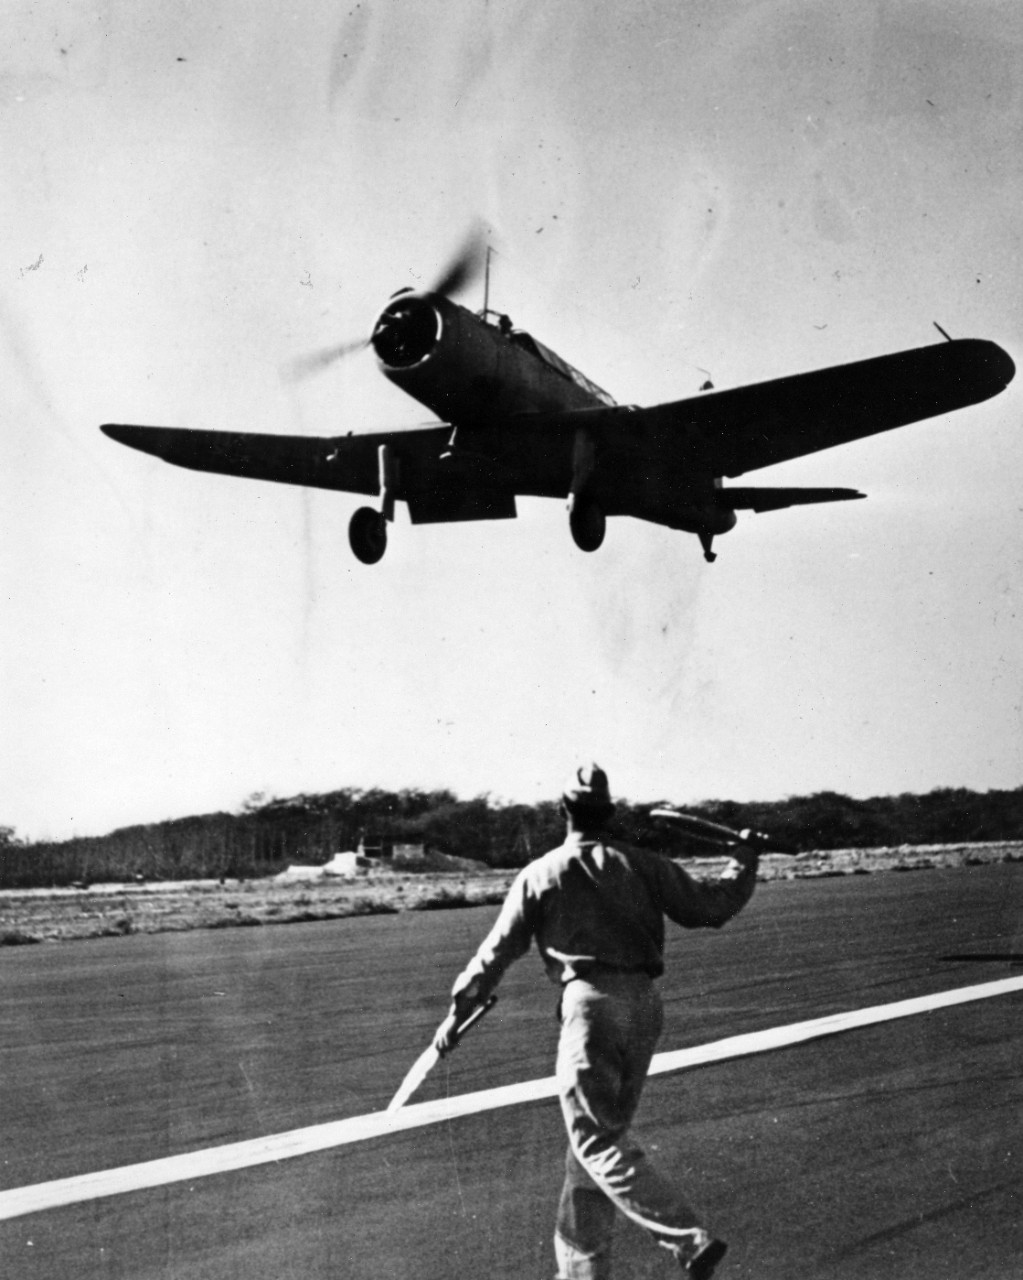 Vought SB2U-3 Vindicator of VMS-2 engaged in a "Bounce Drill" (field carrier landing practice) circa June 1941, at Ewa Field, Hawaii. Group landing signal officer at that time (foreground) was First Lieutenant Robert E. Galer, later awarded a Medal of Honor at Guadalcanal.